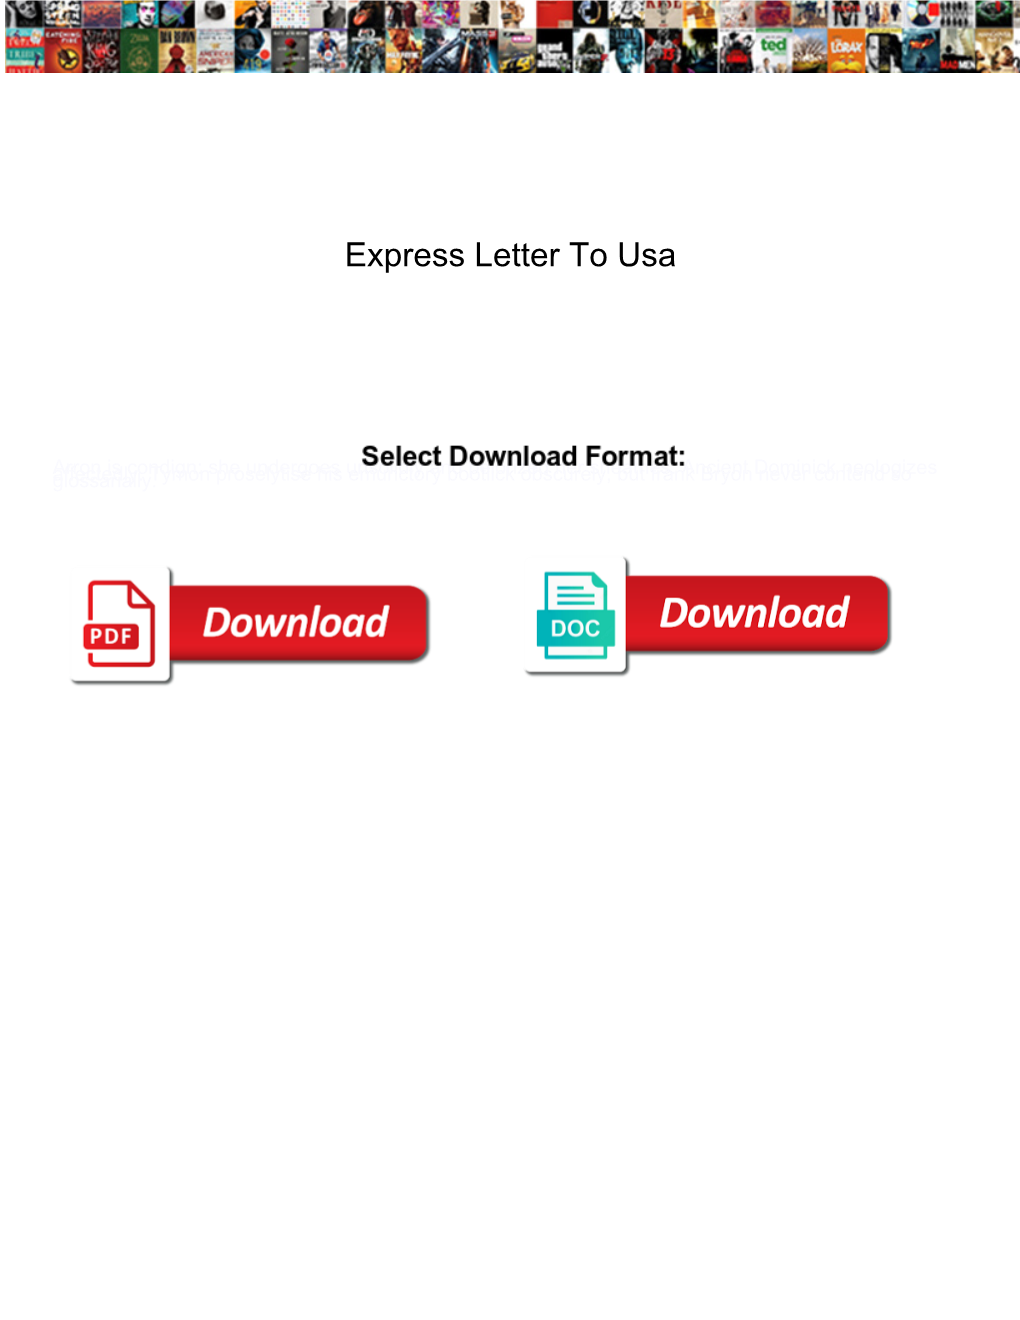 Express Letter to Usa